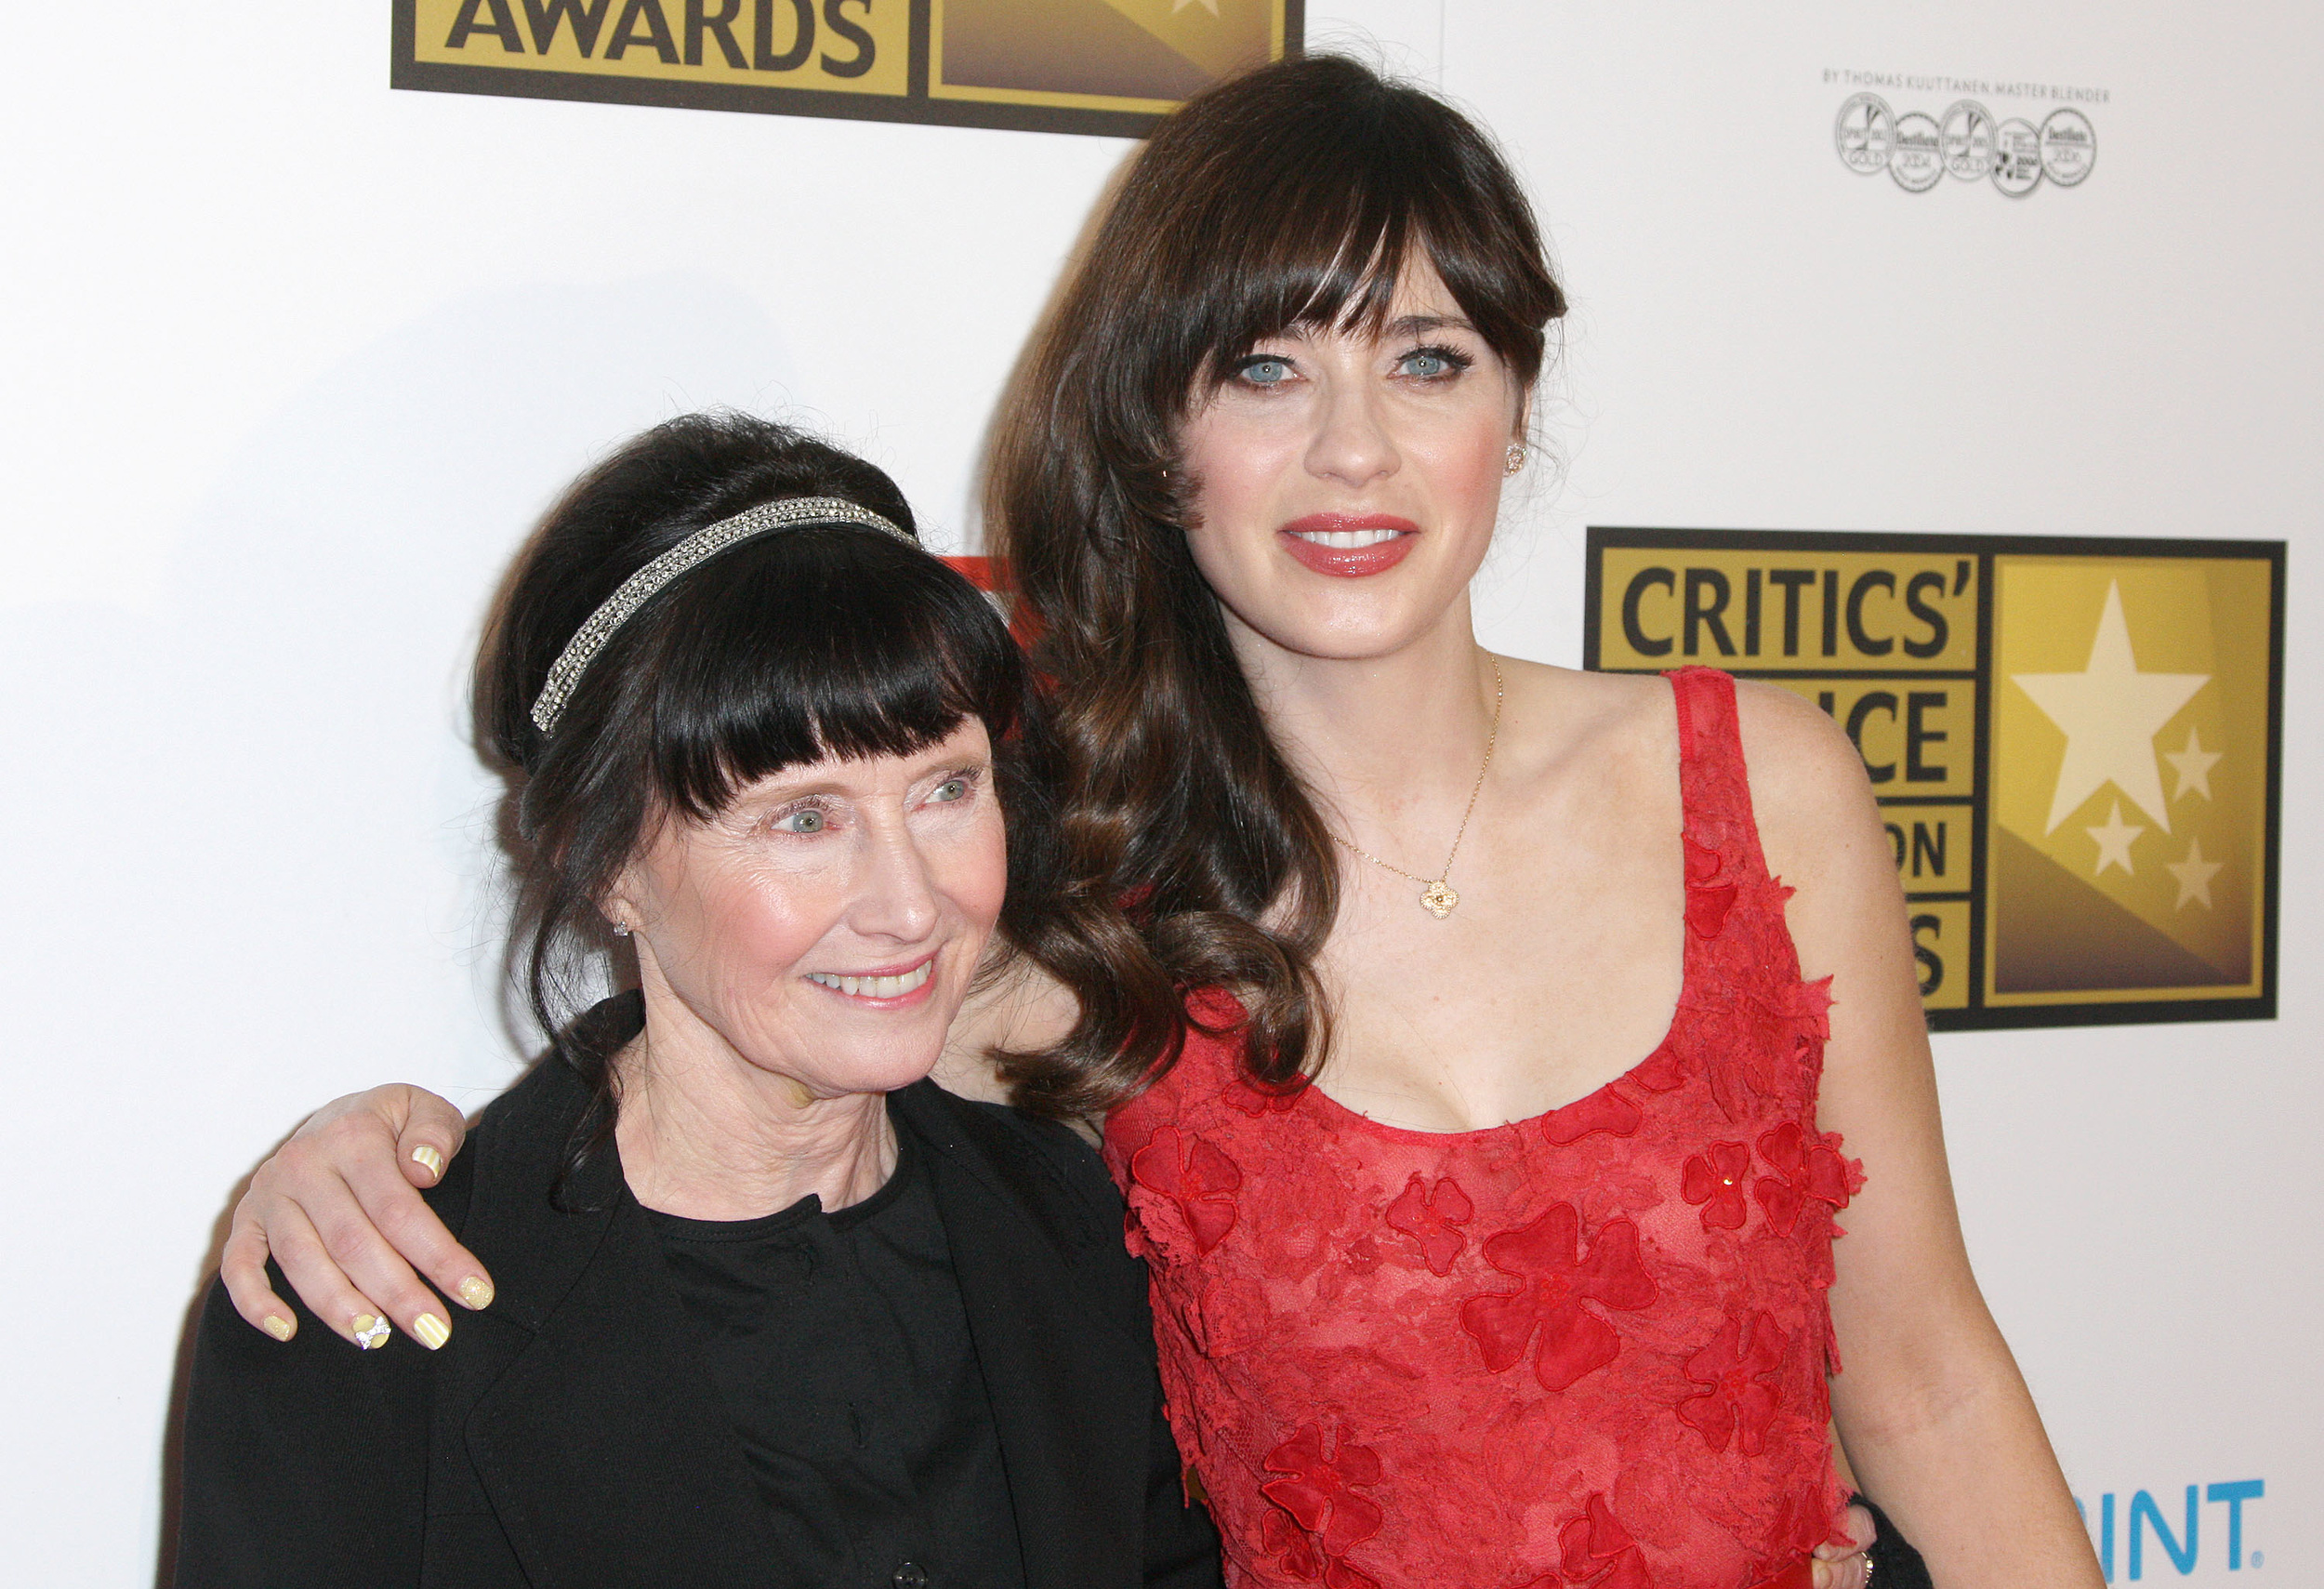 <p>We know sisters Emily (<em>Bones</em>) and Zooey (<em>New Girl, 500 Days of Summer</em>), but these successful acting sisters grew up in the business. Their father, Caleb, is a well-respected cinematographer and director, while their mom, Mary Jo, is probably best known for her role as John Glenn's shy, <a href="https://www.youtube.com/watch?v=YnjctxFyFLU">soft-spoken wife in <em>The Right Stuff </em>(1983)</a>.</p><p><a href='https://www.msn.com/en-us/community/channel/vid-cj9pqbr0vn9in2b6ddcd8sfgpfq6x6utp44fssrv6mc2gtybw0us'>Follow us on MSN to see more of our exclusive entertainment content.</a></p>